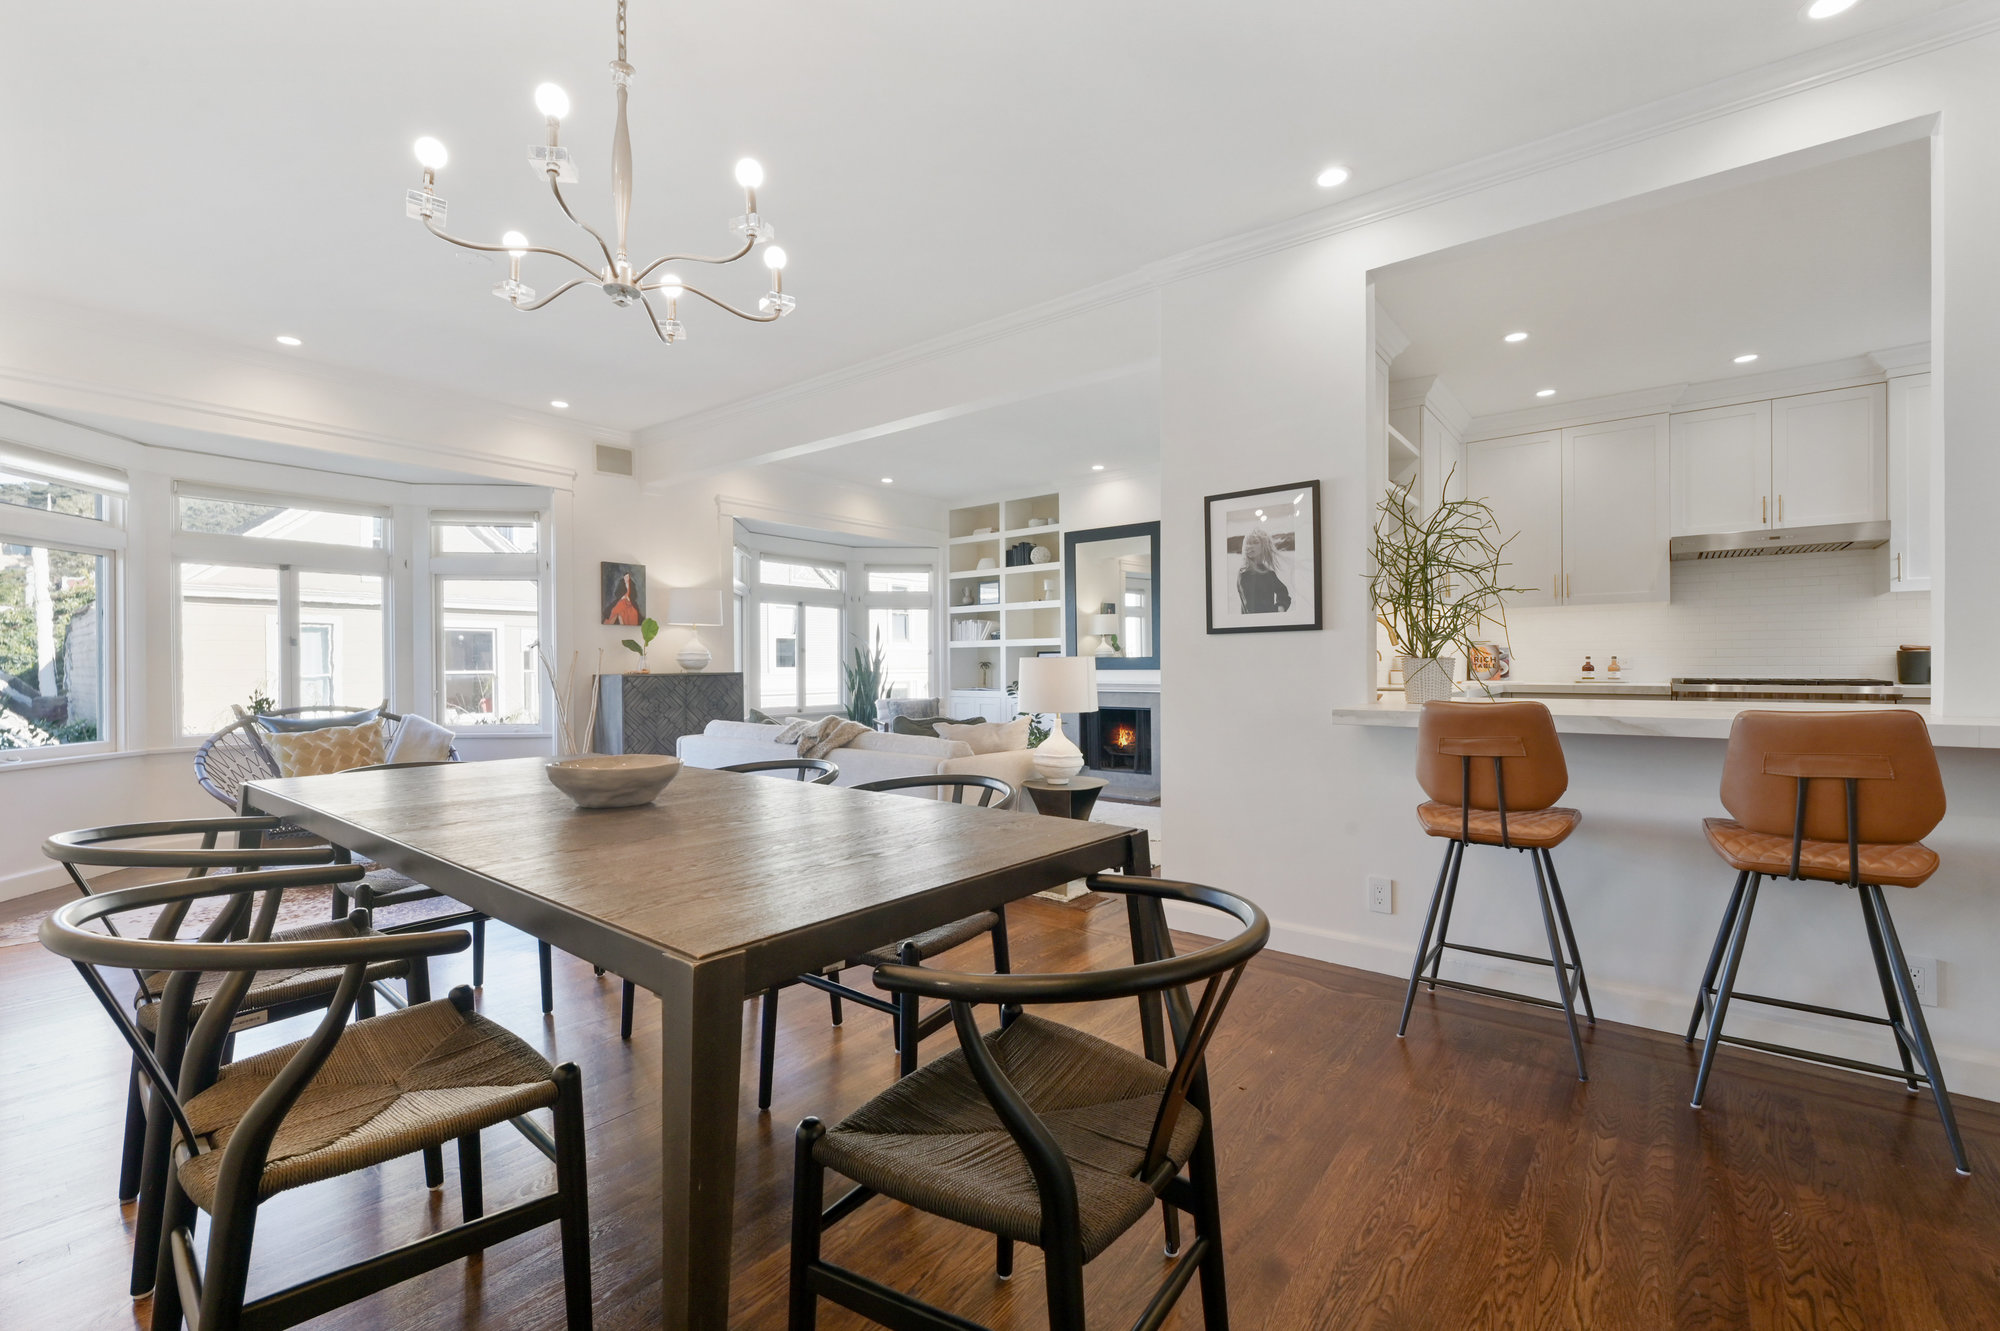 Property Photo: Open floor plan view of the dining room and kitchen